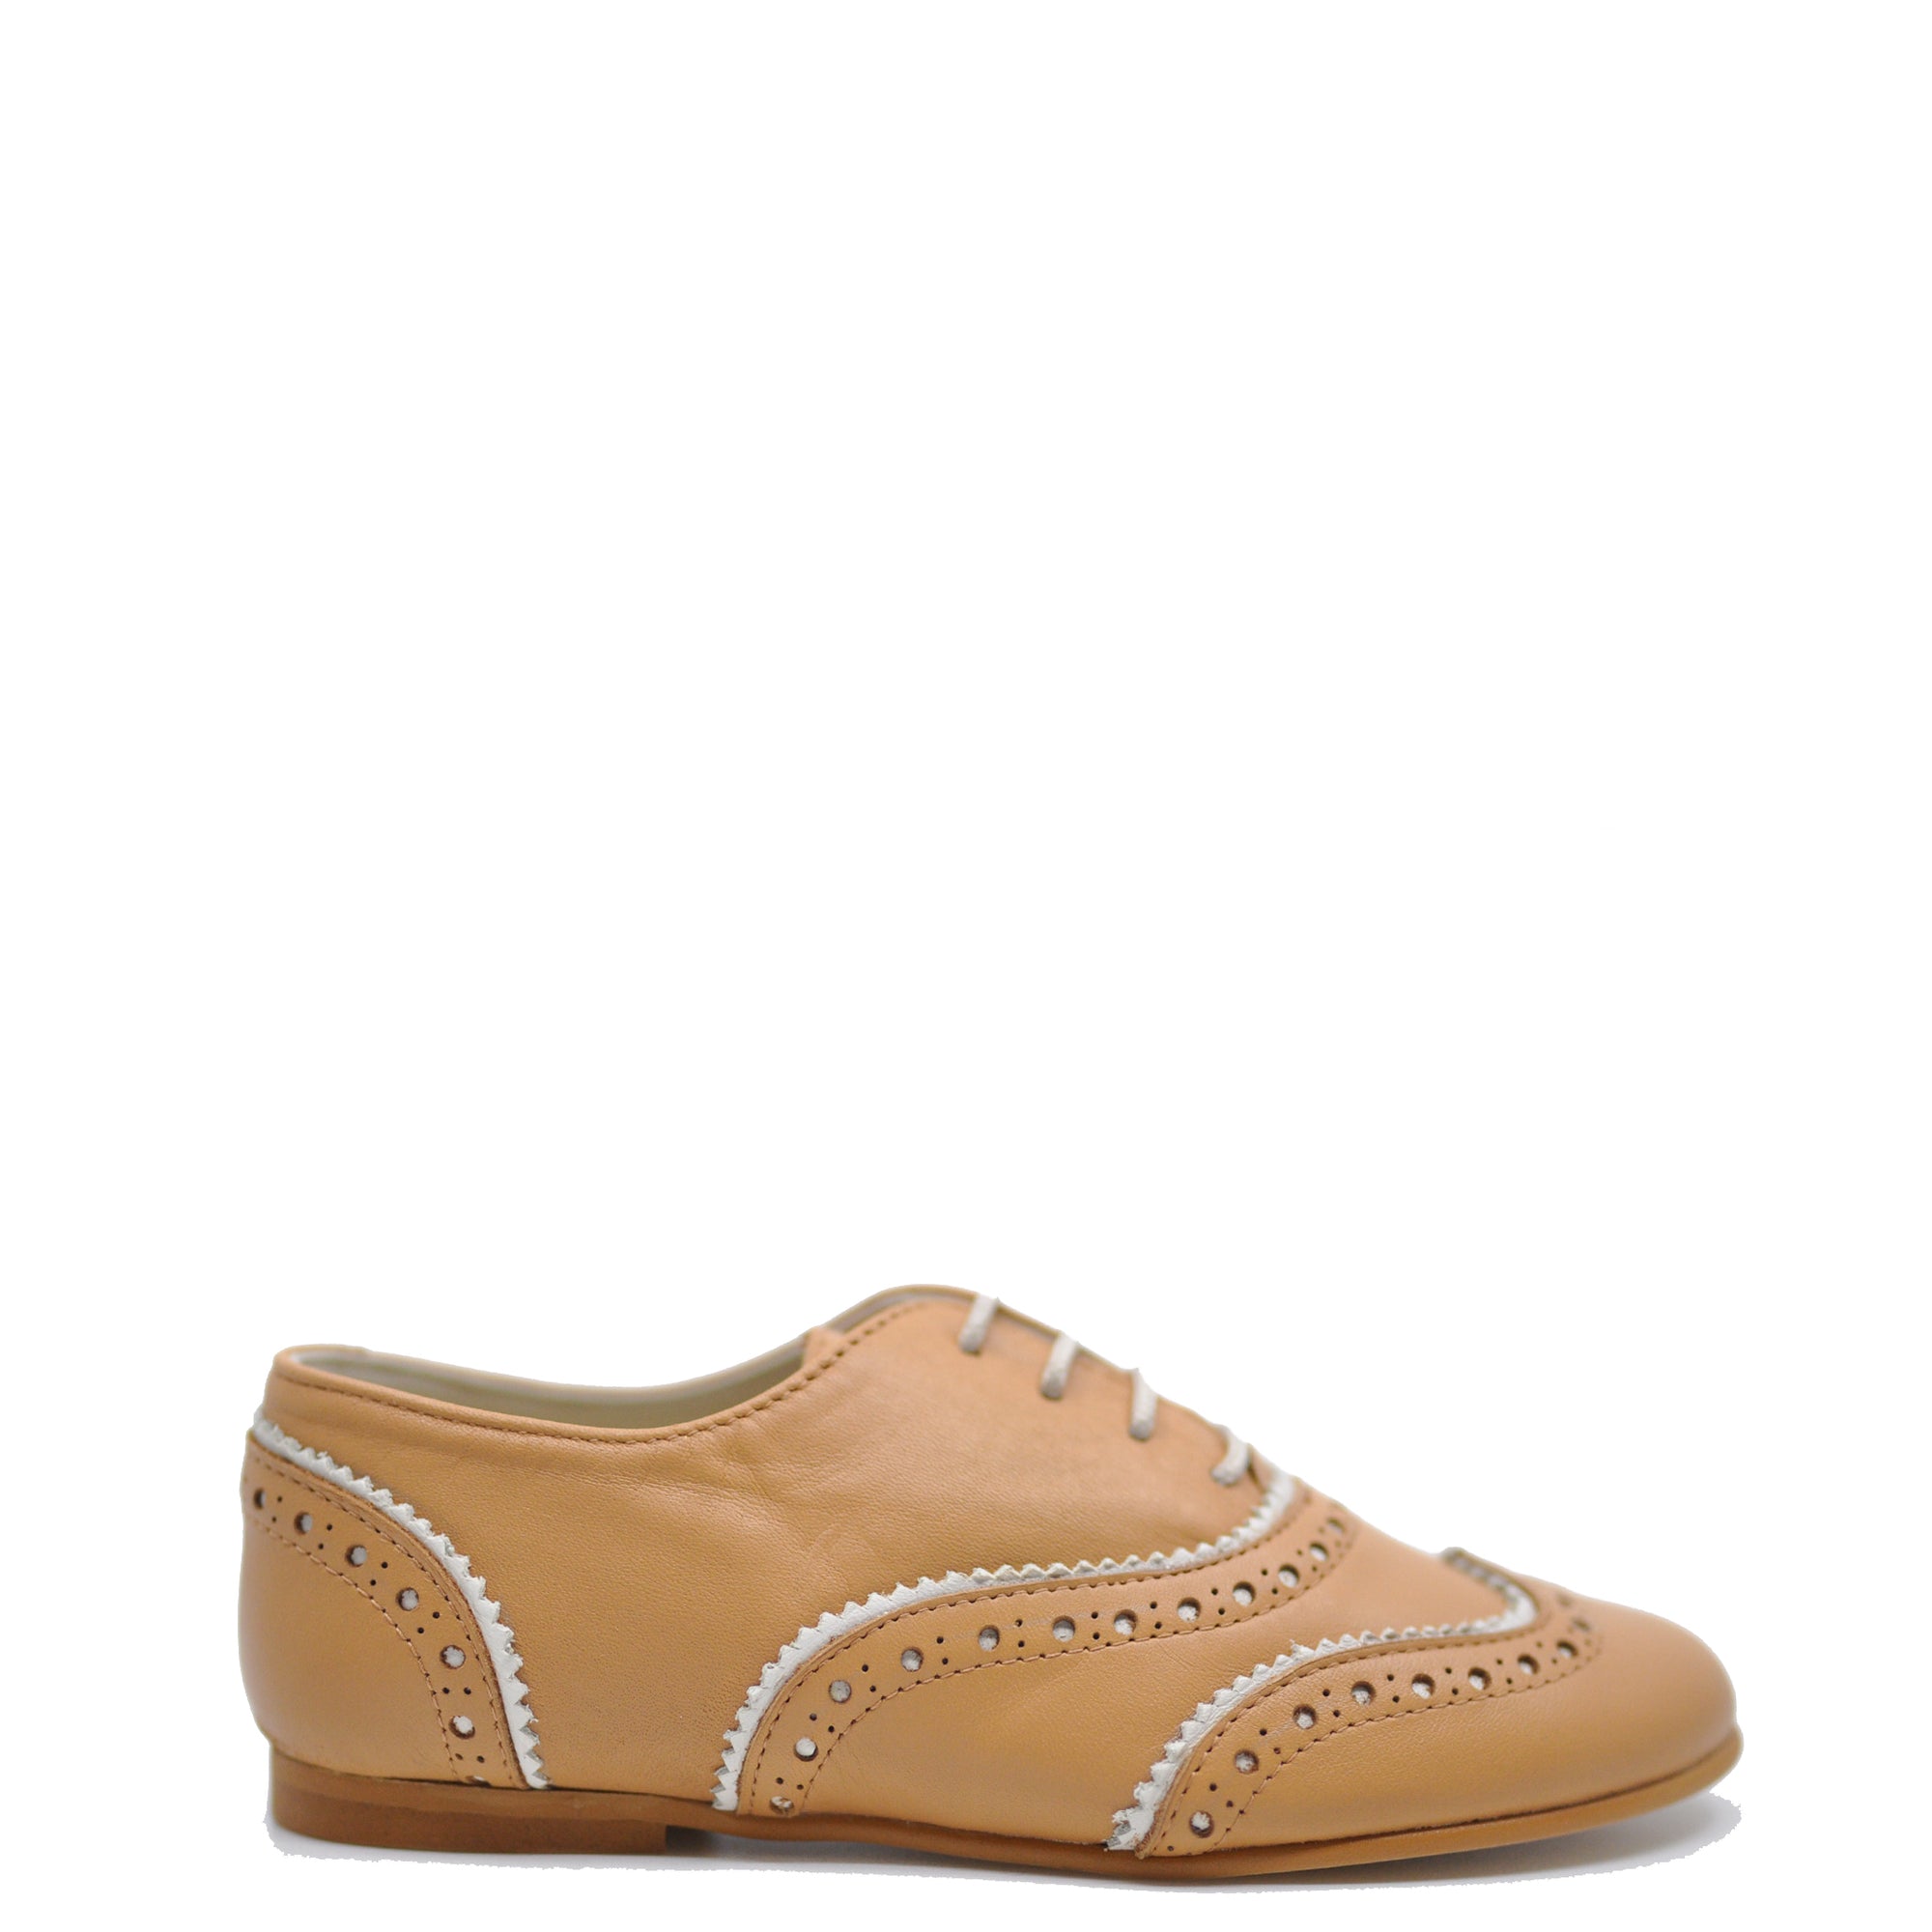 Sonatina Tan and White Wingtip Oxford-Tassel Children Shoes